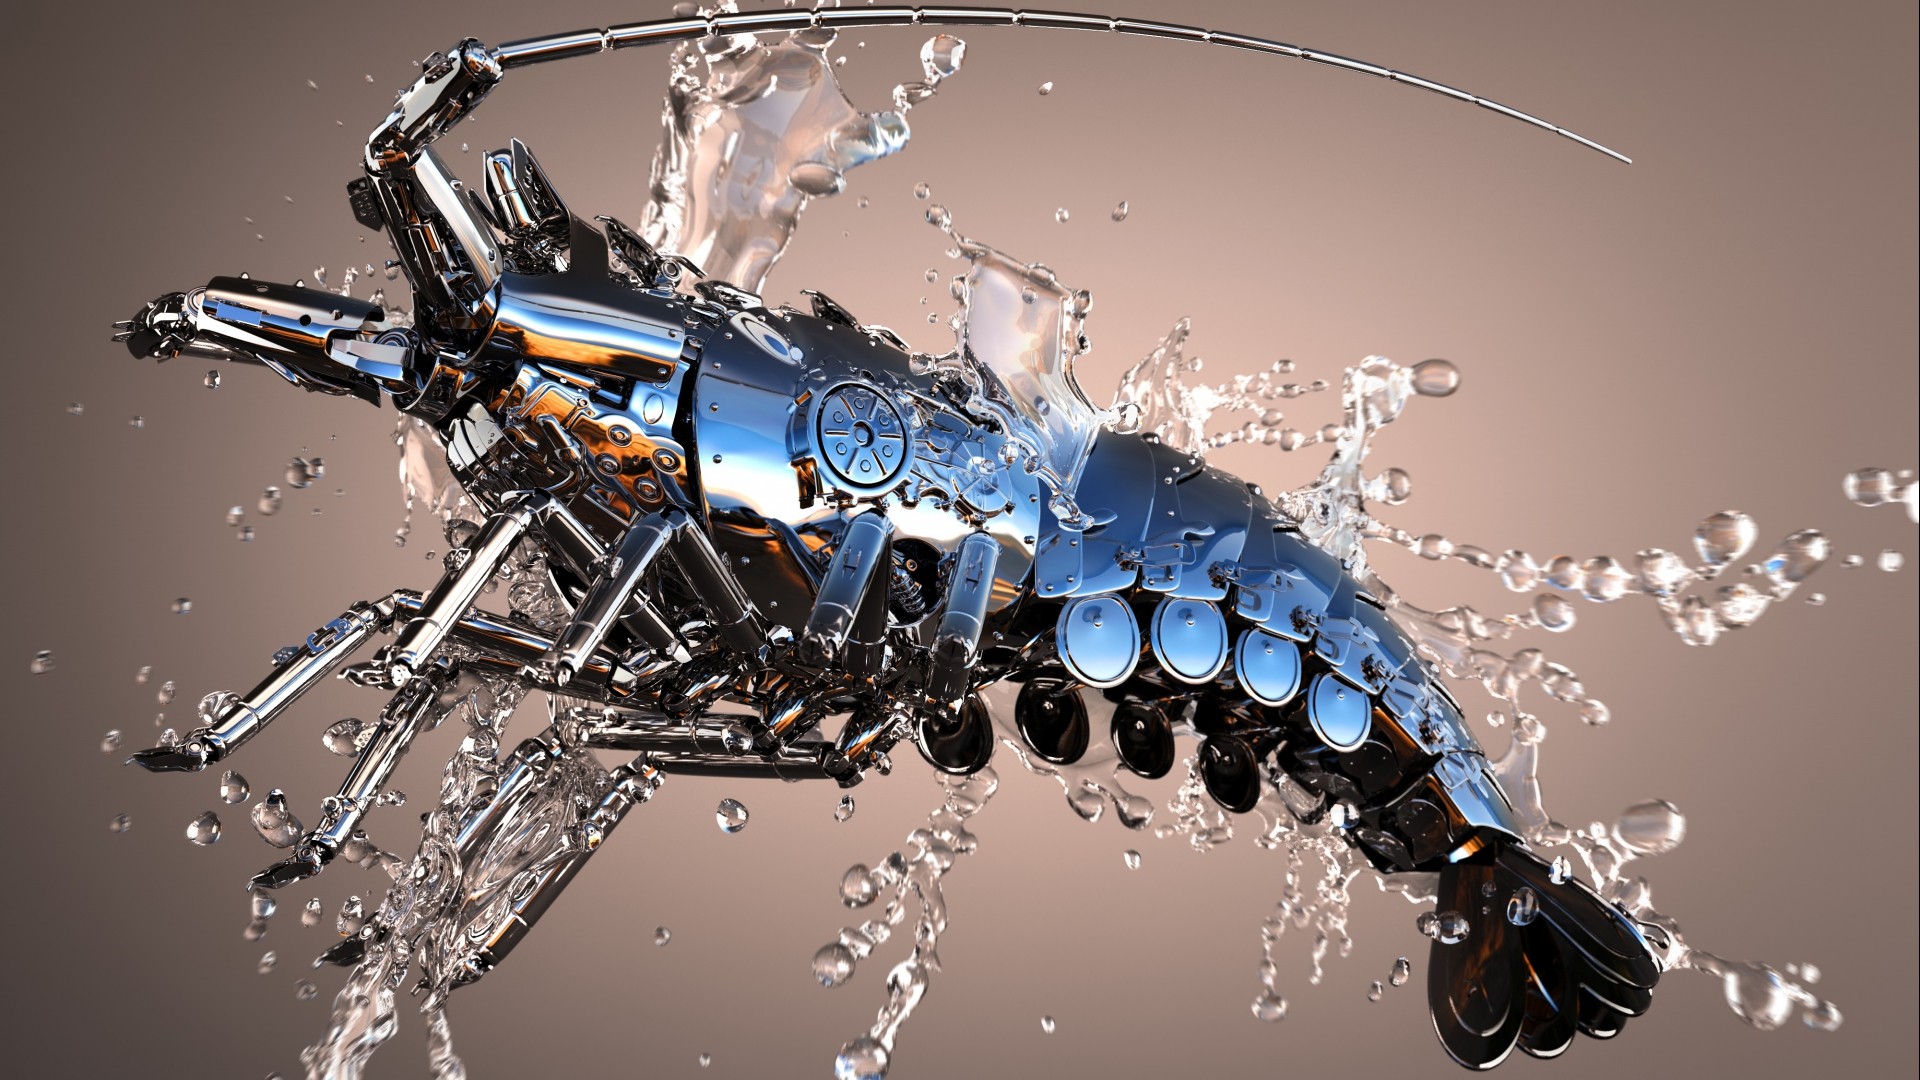 General 1920x1080 digital art animals CGI splashes metal water drops simple background lobsters reflection